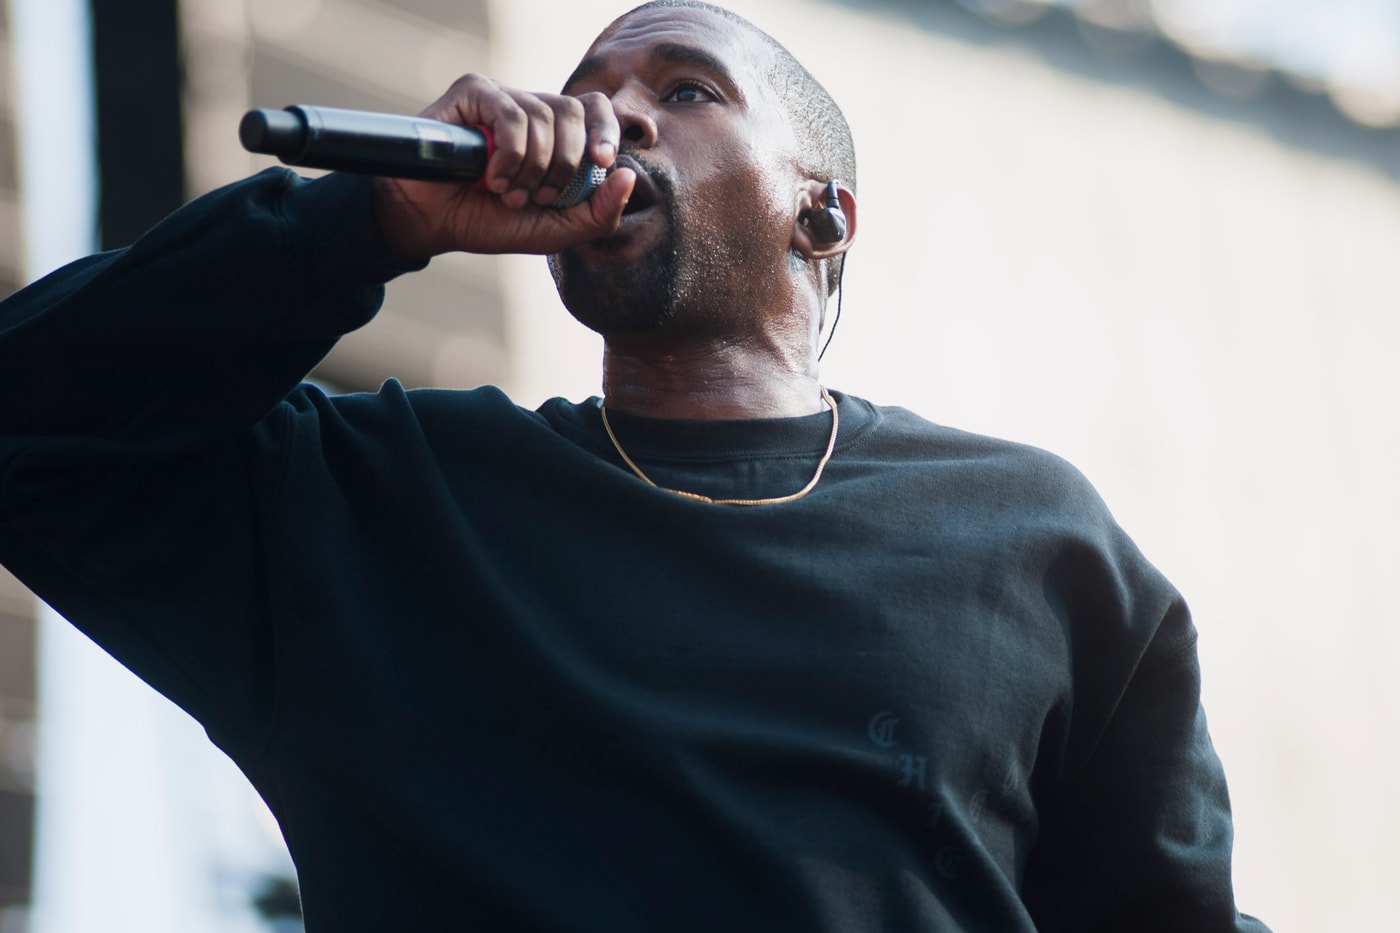 kanye-wests-surprise-performance-at-aap-rockys-coachella-cut-short-from-overtime